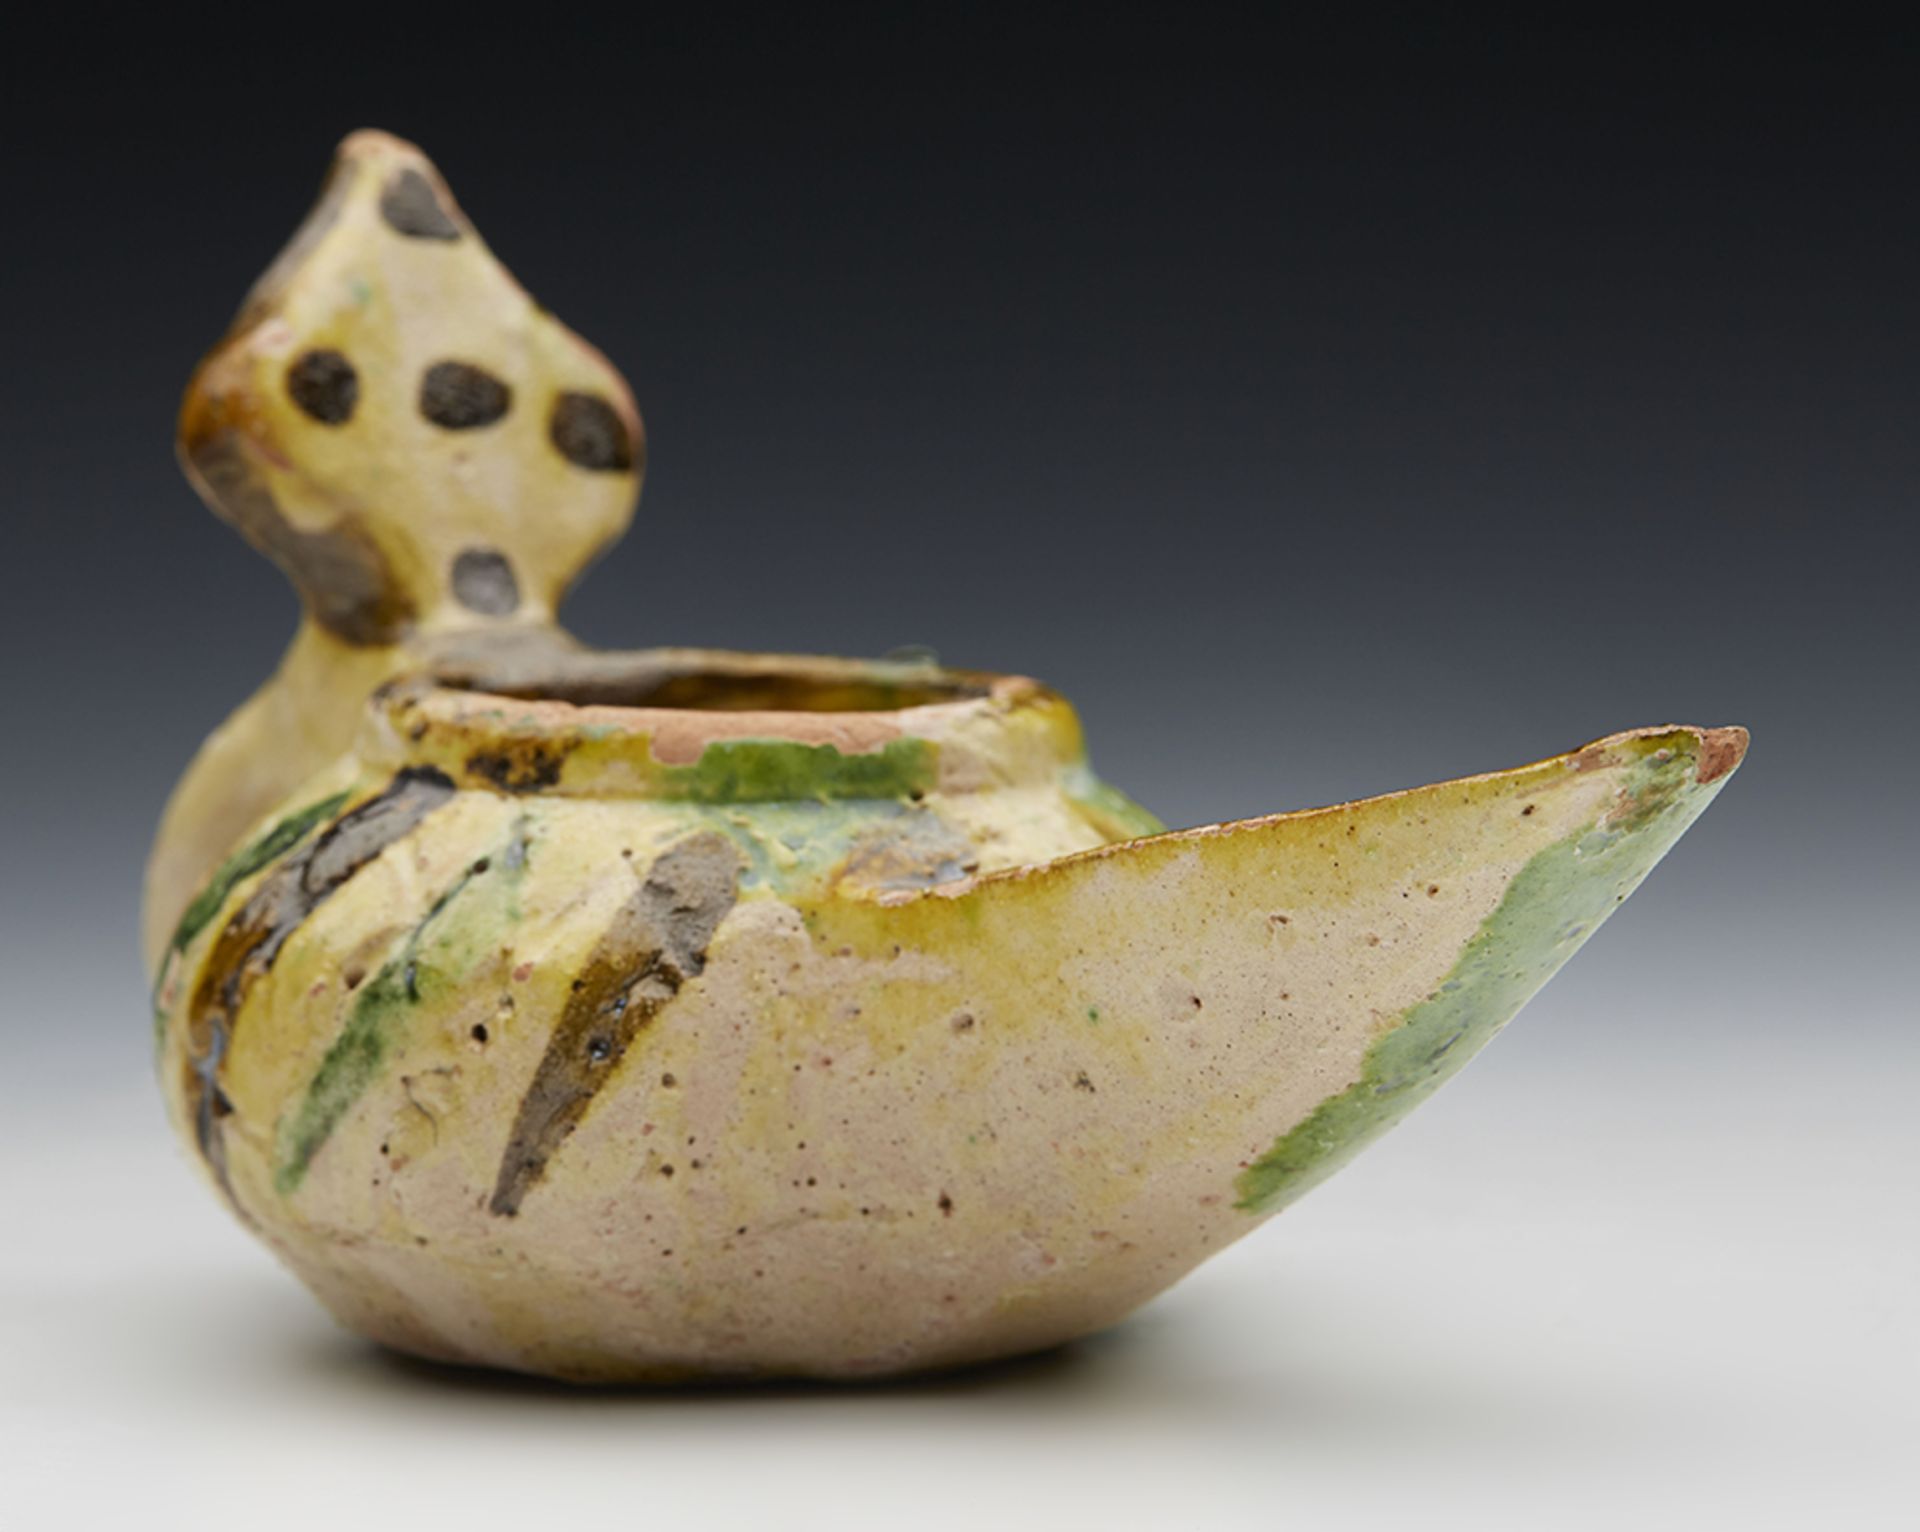 ISLAMIC ANTIQUITY GLAZED POTTERY OIL LAMP 10TH Ð 11TH C. - Image 5 of 7